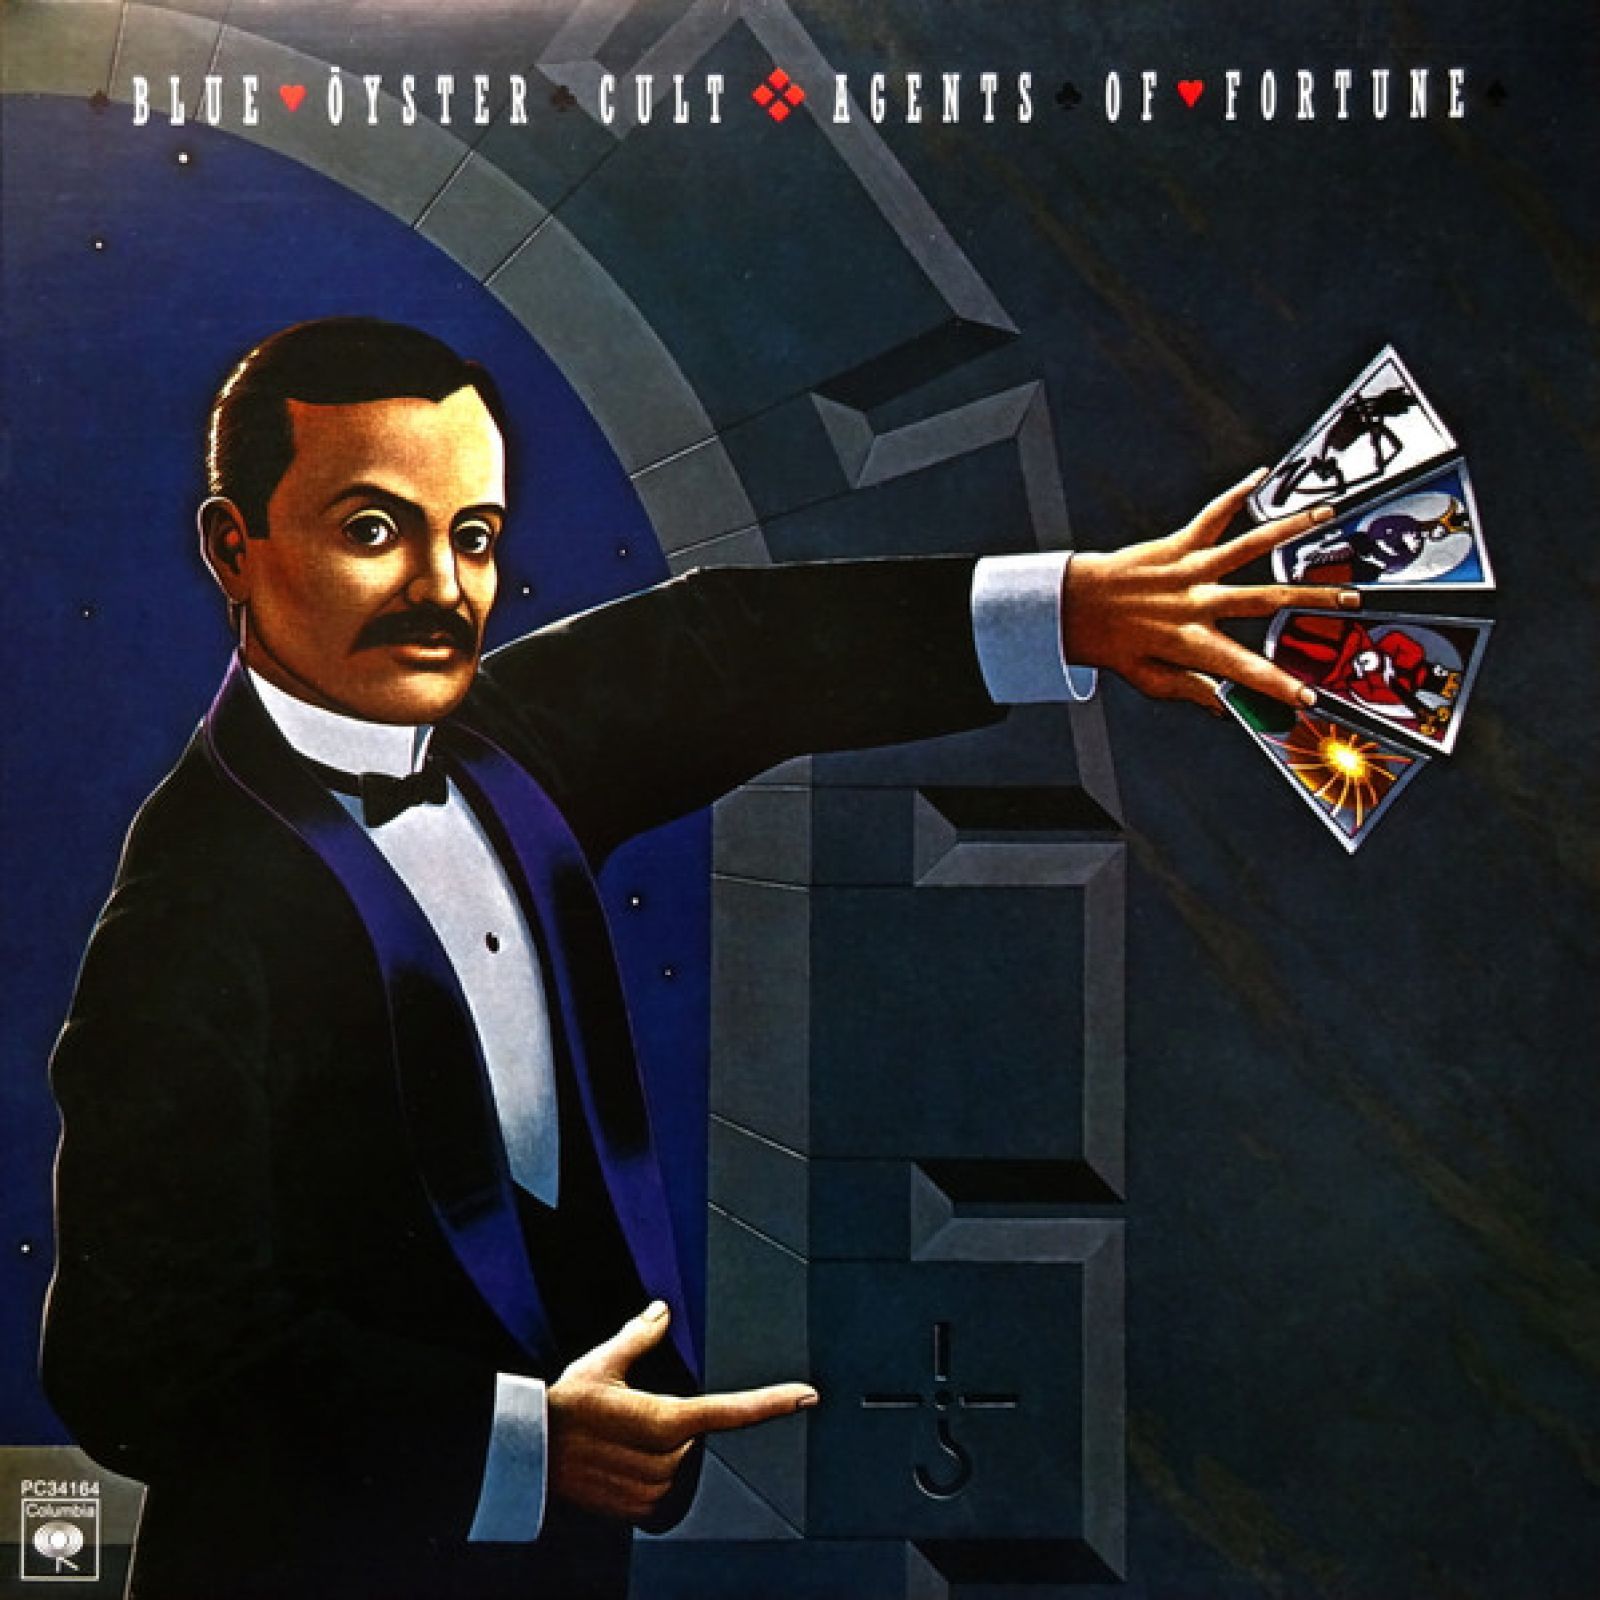 Виниловая пластинка Blue Oyster Cult, Agents Of Fortune (8718469535170)